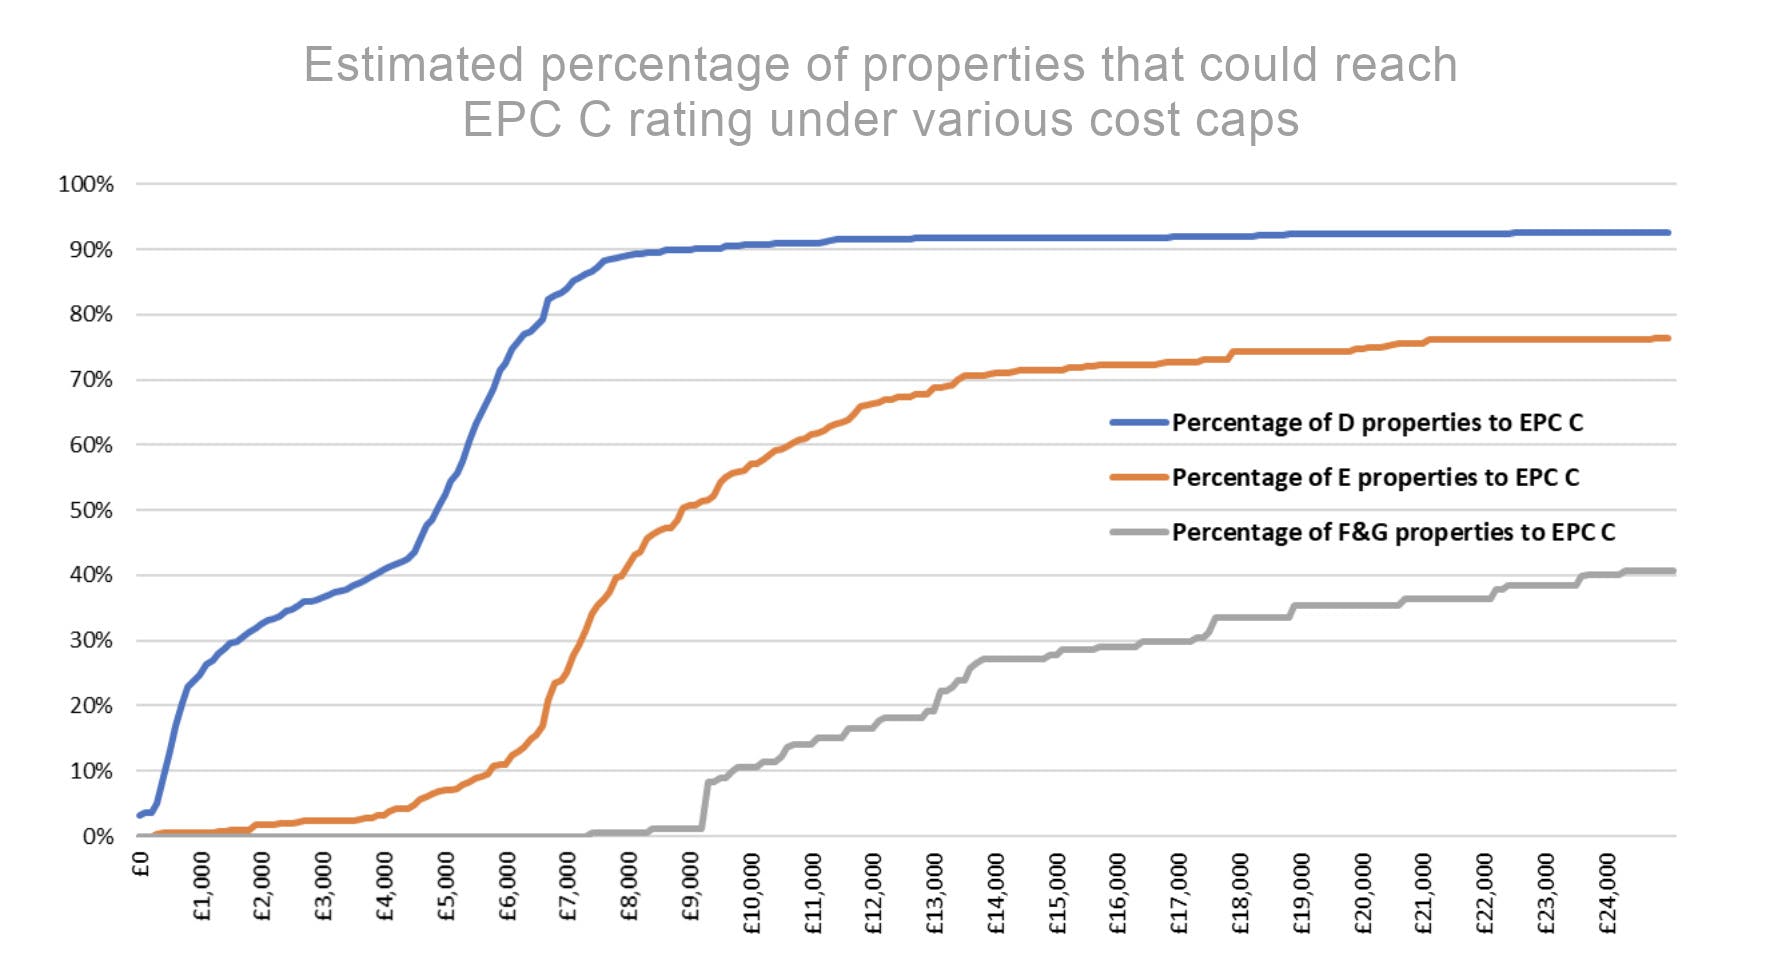 Estimated percentage of properties that could reach EPC C rating under various cost caps